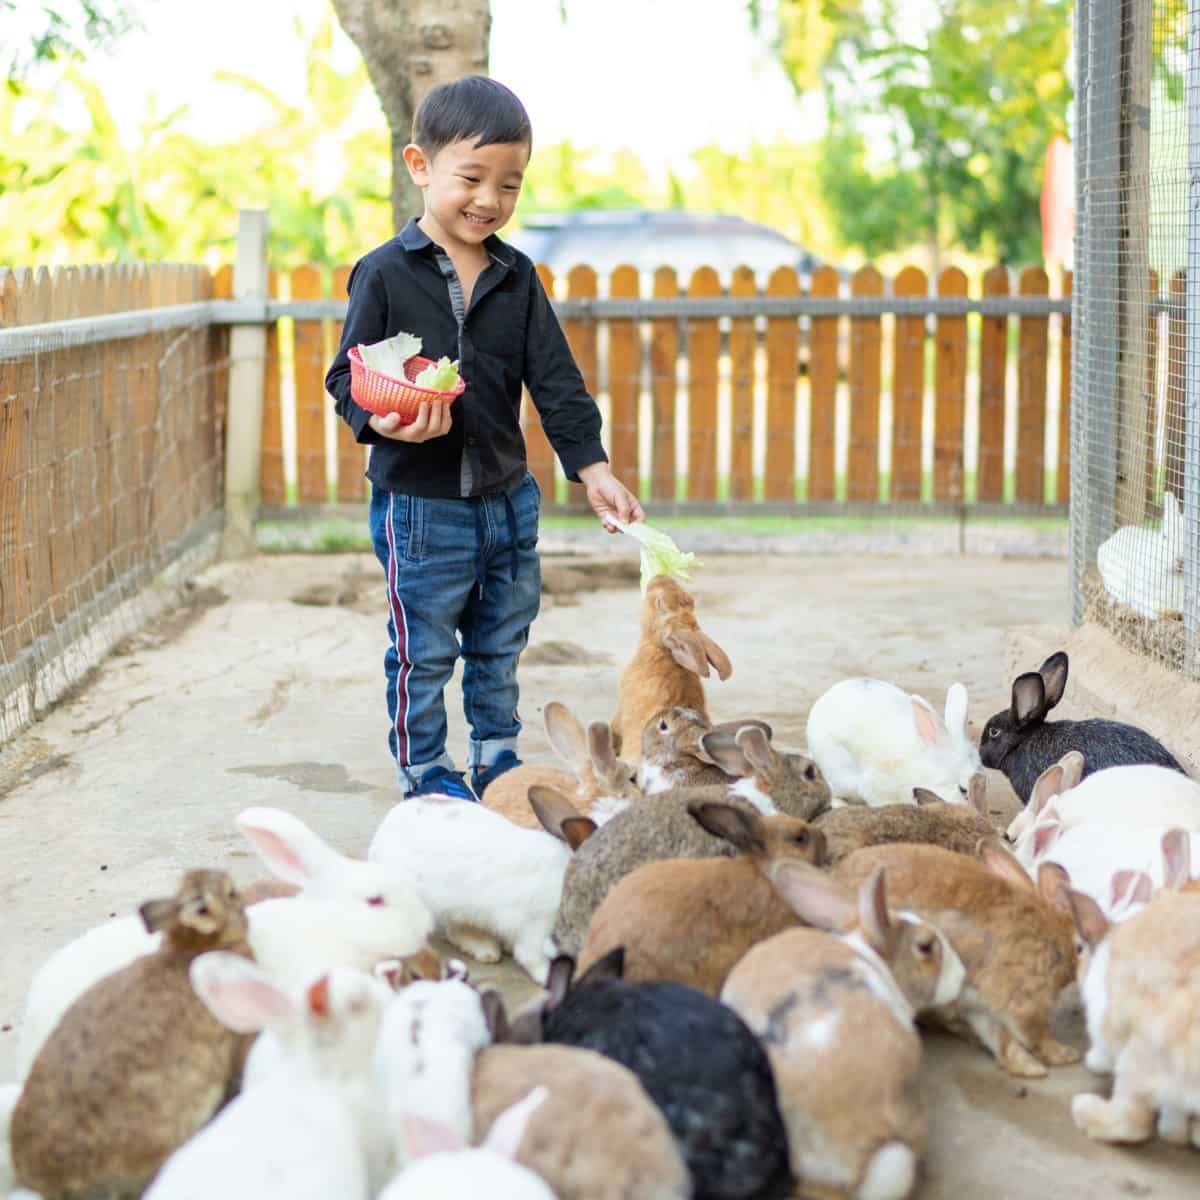 How to Start Rabbit Farming in Mexico